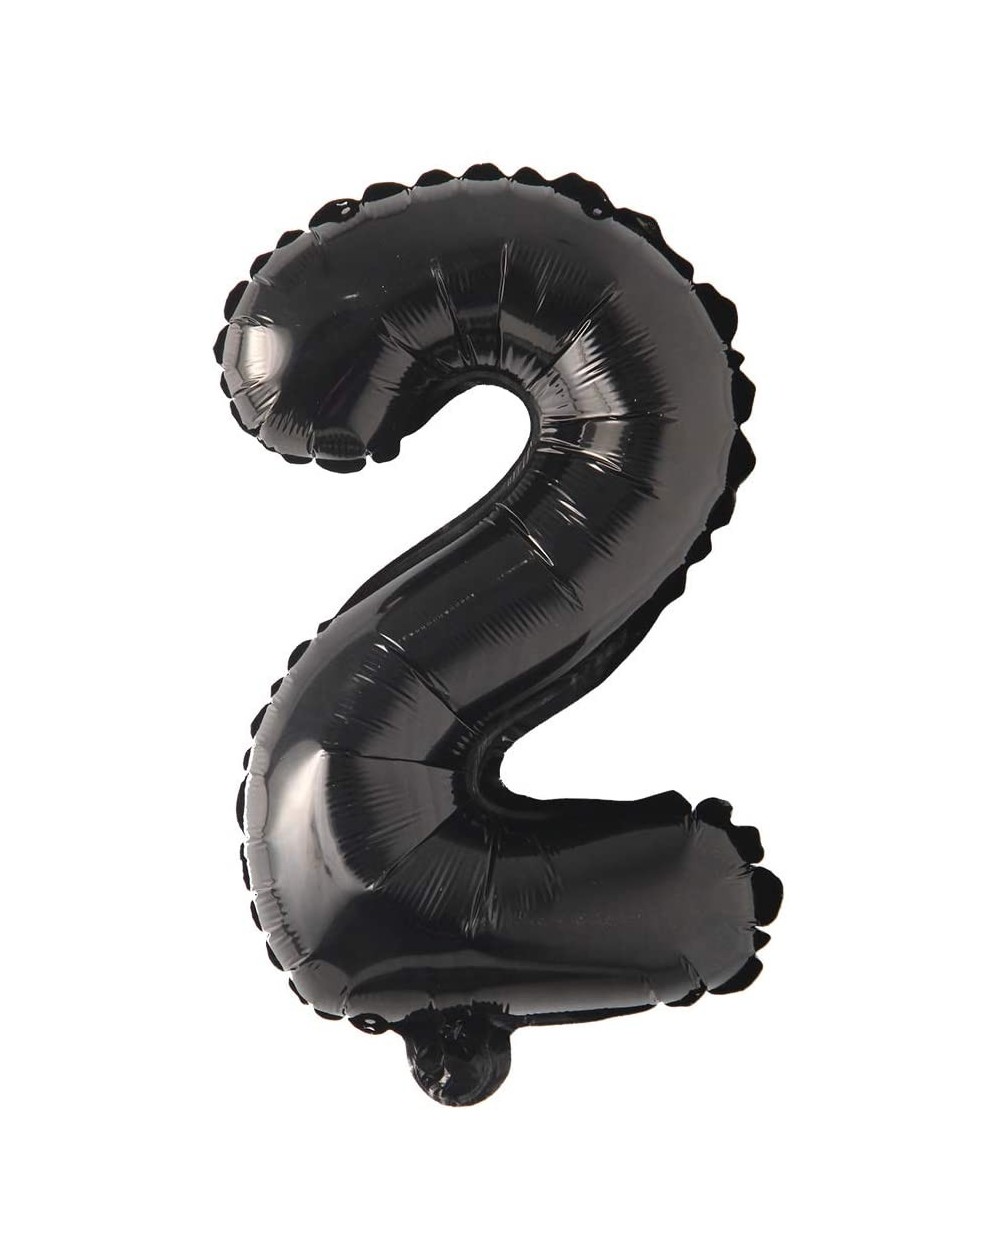 Balloons 40 Inch Black Large Foil Letter Ballon Wedding Birthday Party Decorations Kids Adults Ballon Baby Shower Helium Floa...